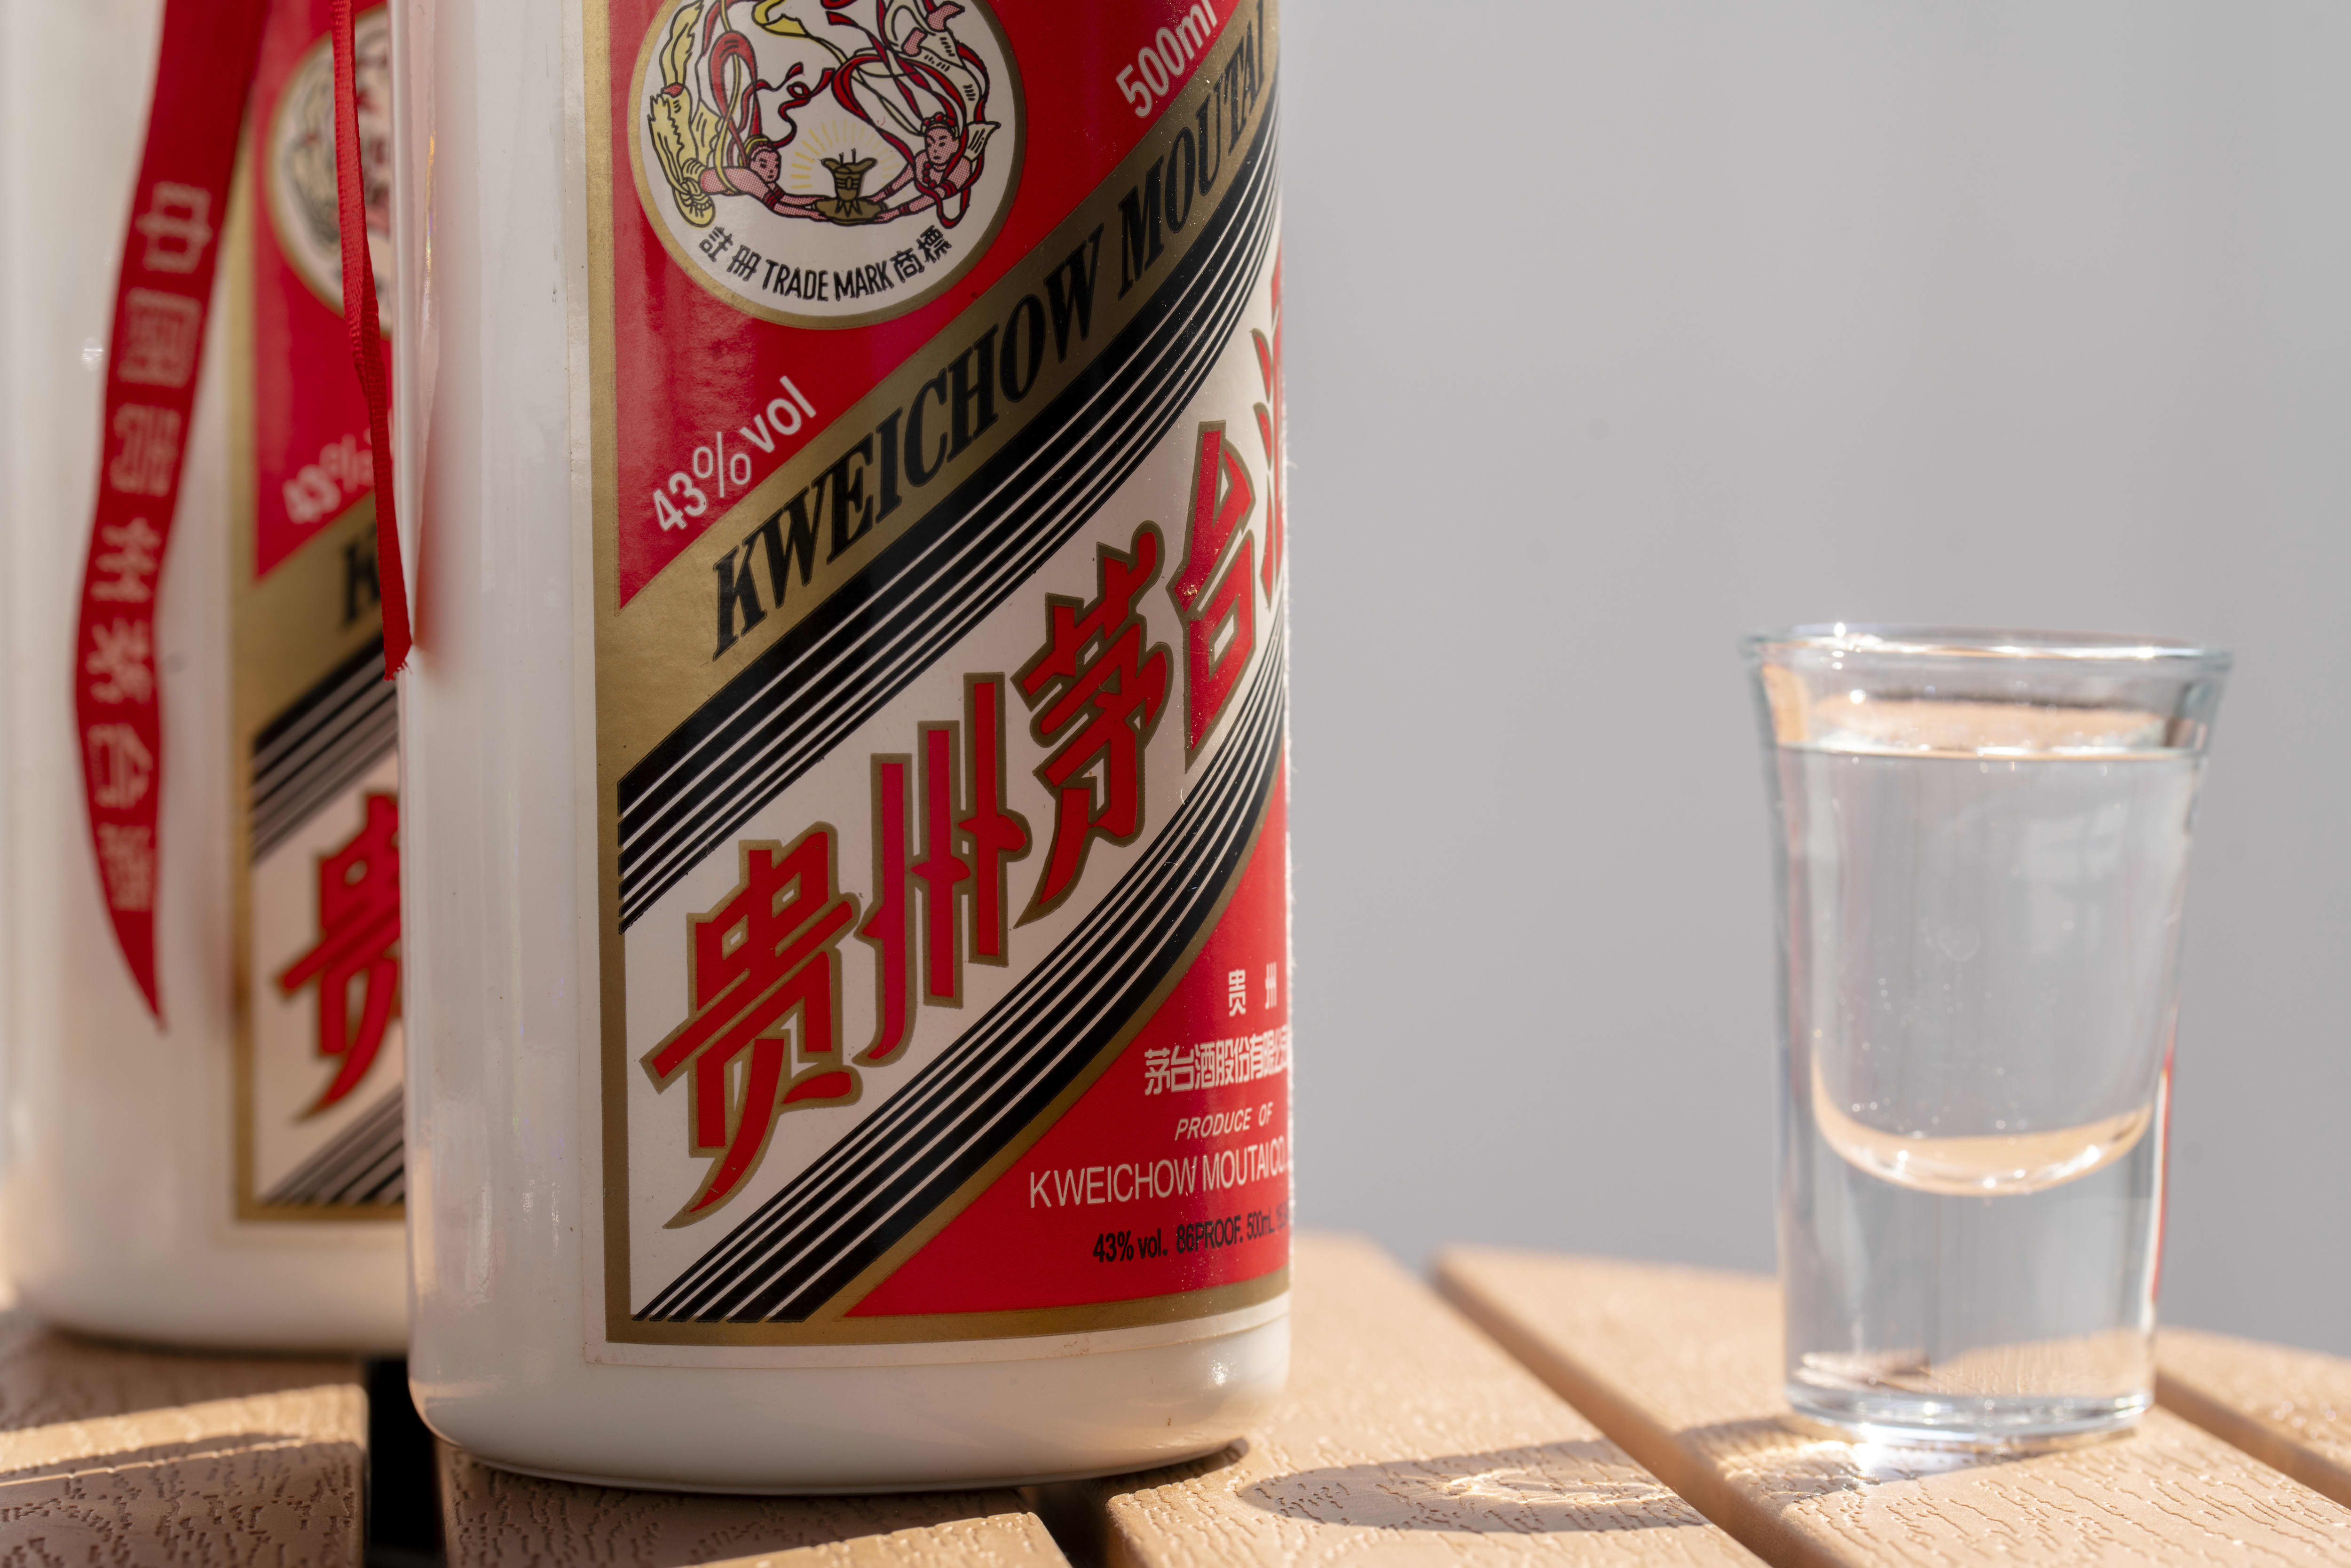 The Chinese liquor stock compared to bitcoin clings to 2020 earnings